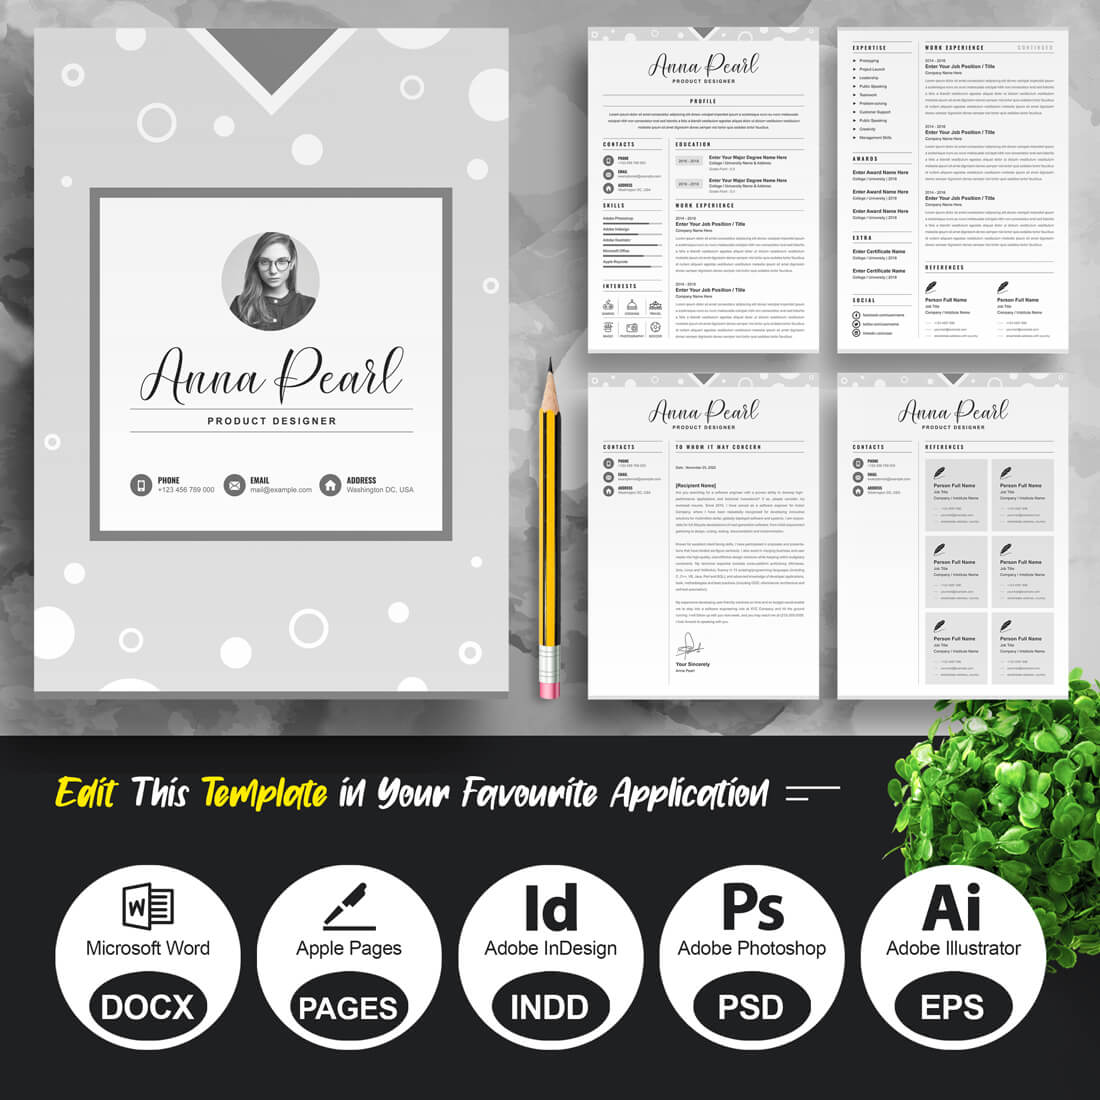 Resume Template / CV Template cover image.